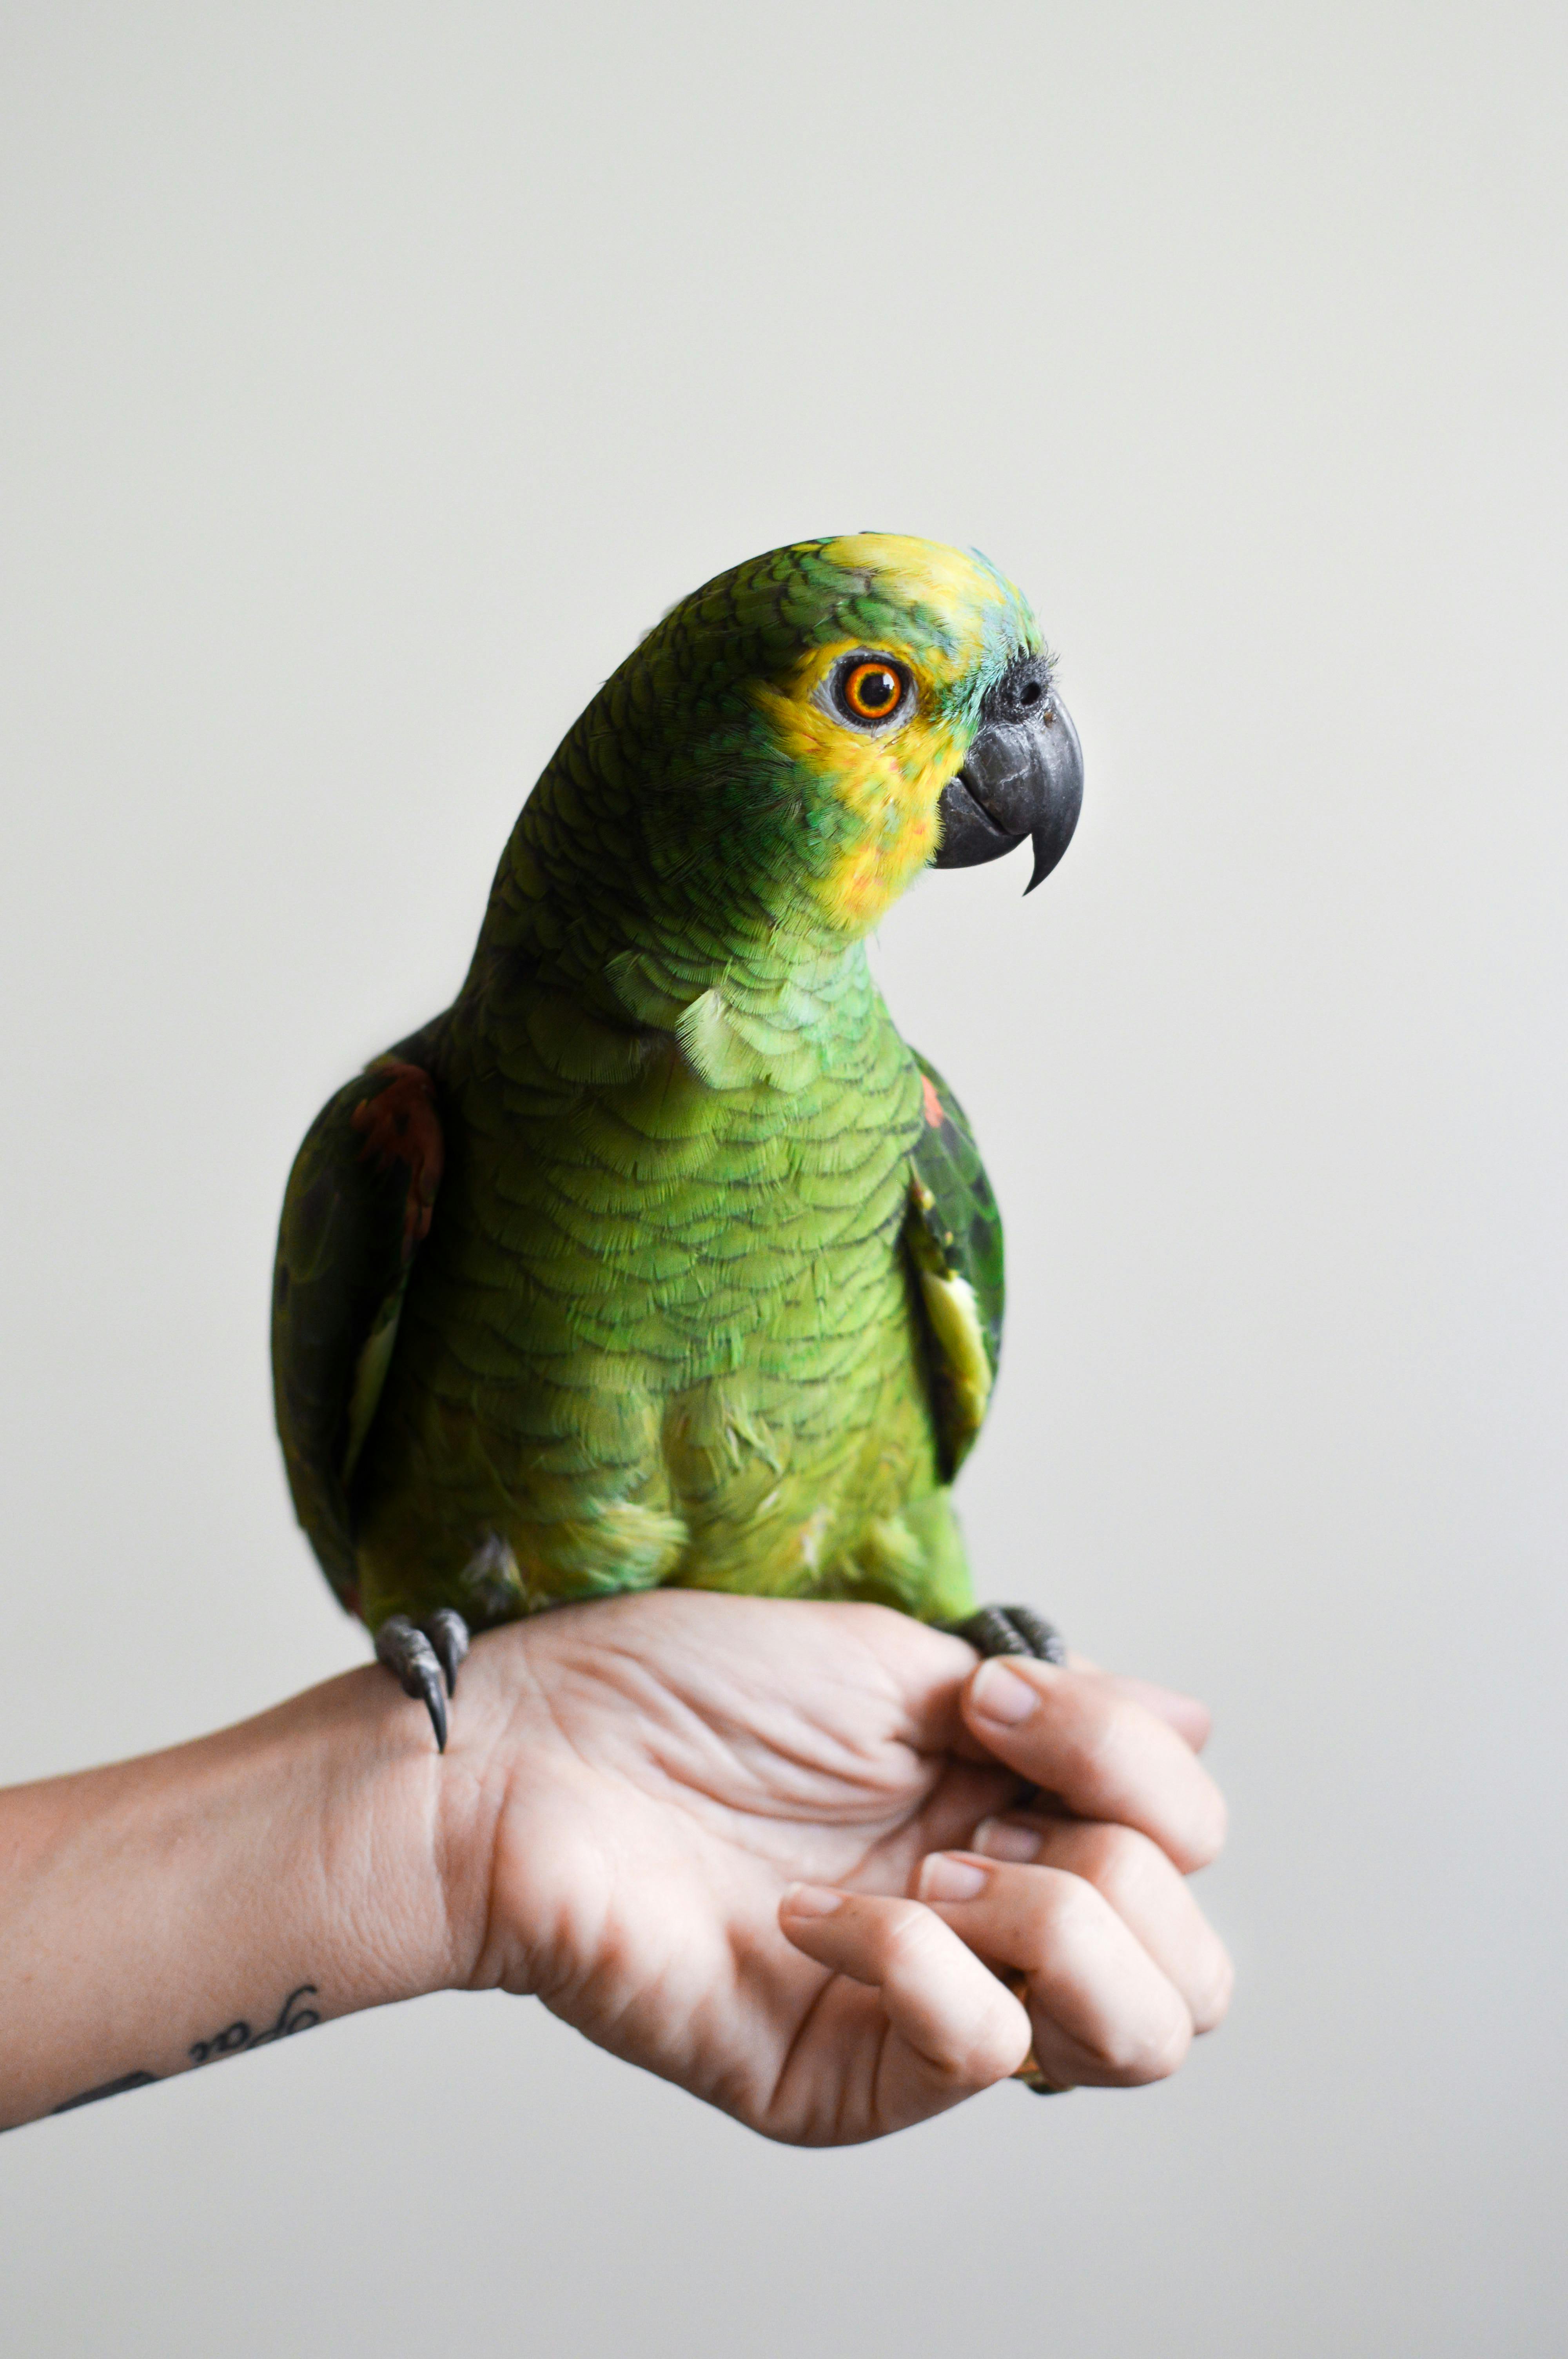 A parrot on person's hand. | Photo: Pexels